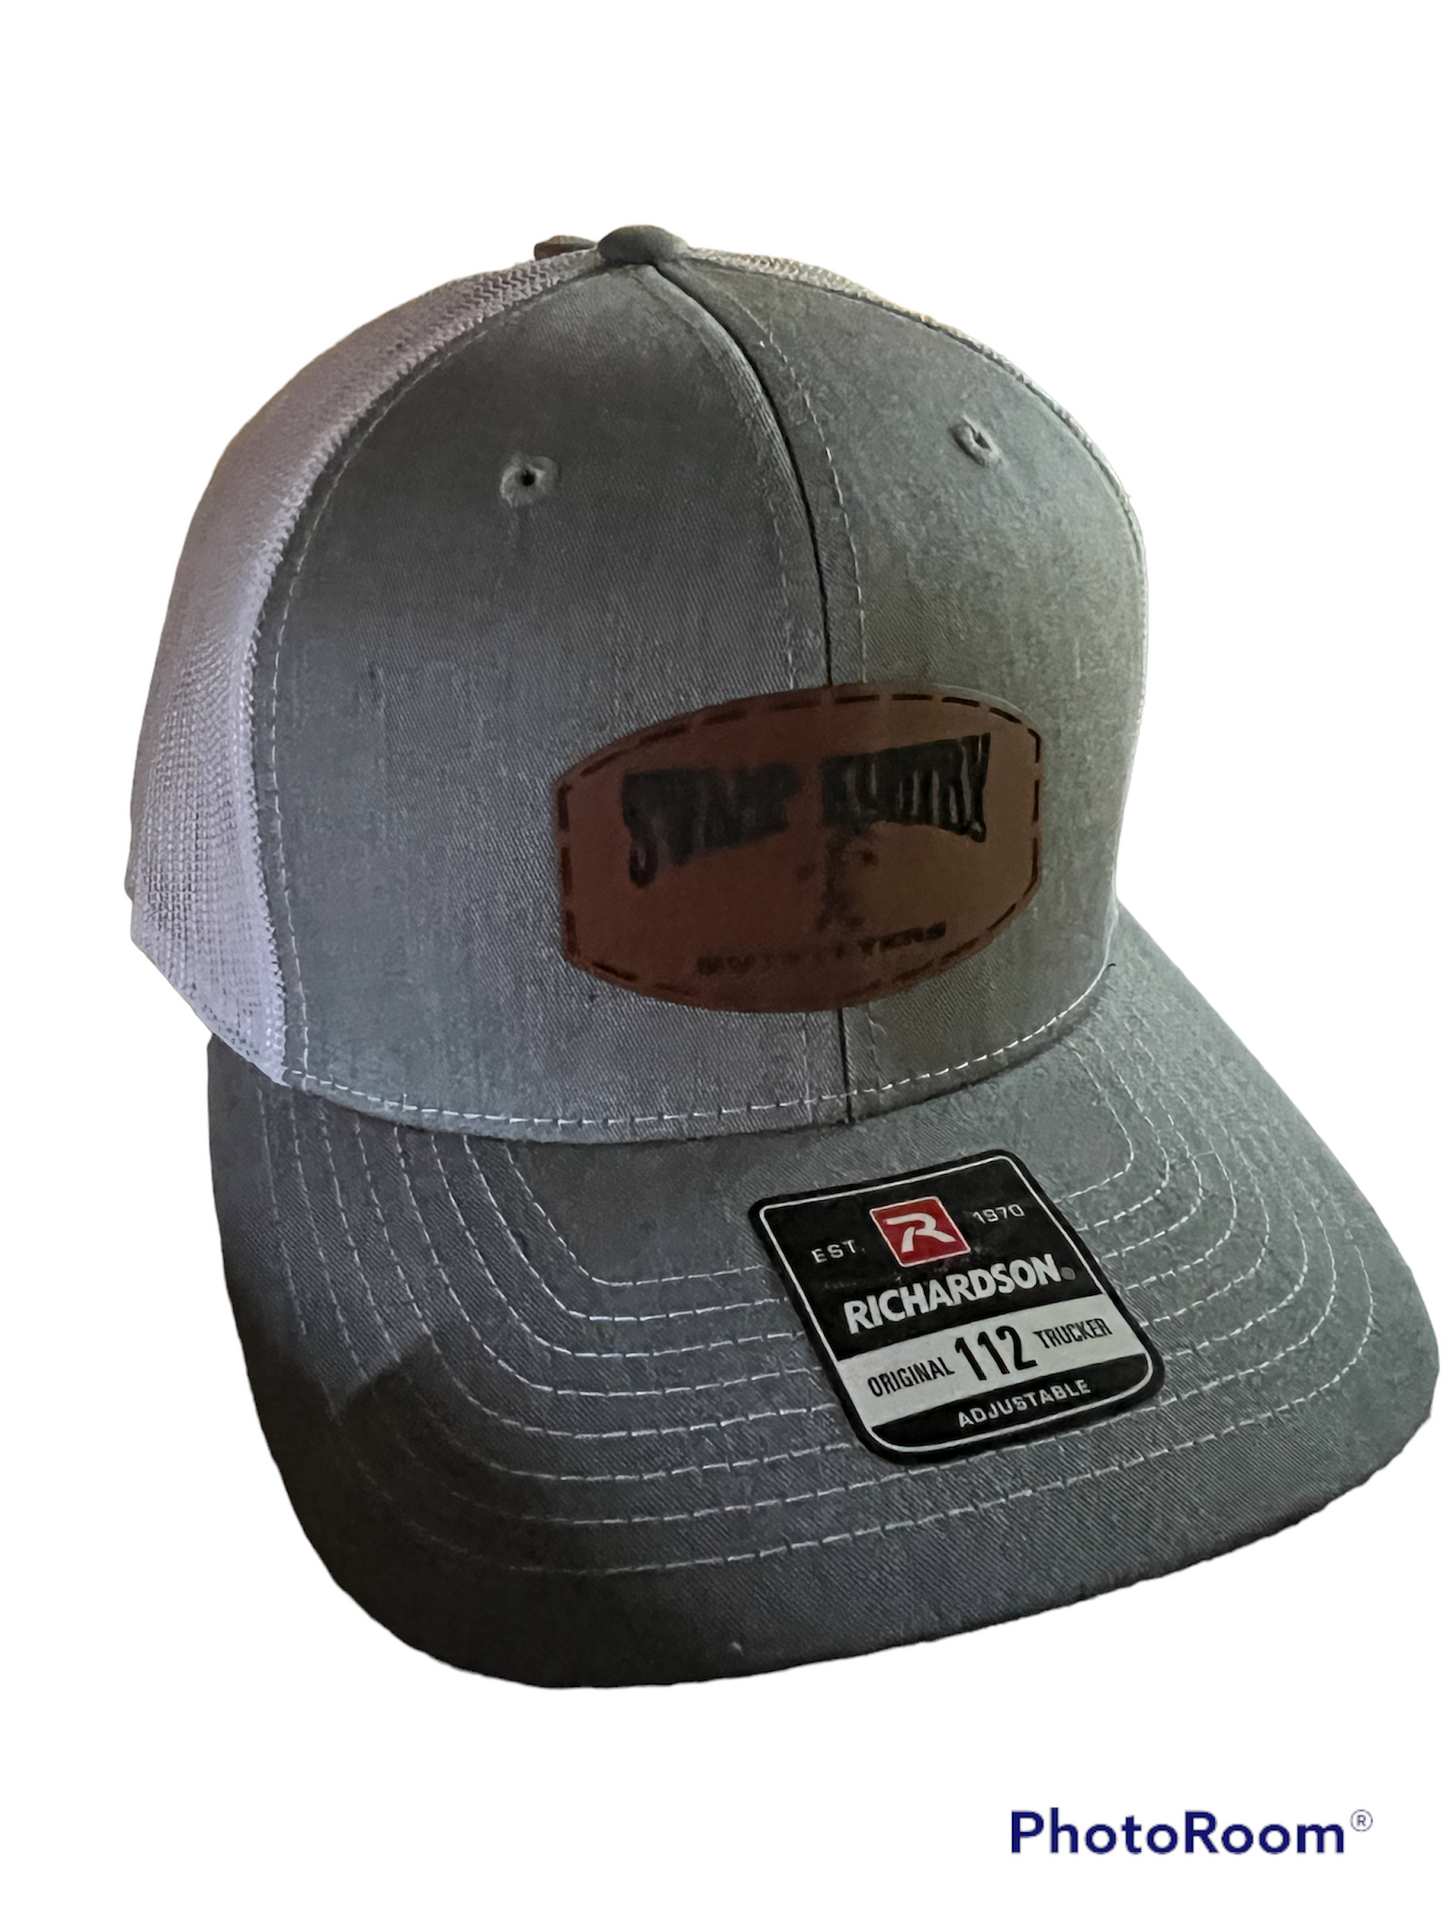 Swamp Kuntry Leather Patch Logo Hat